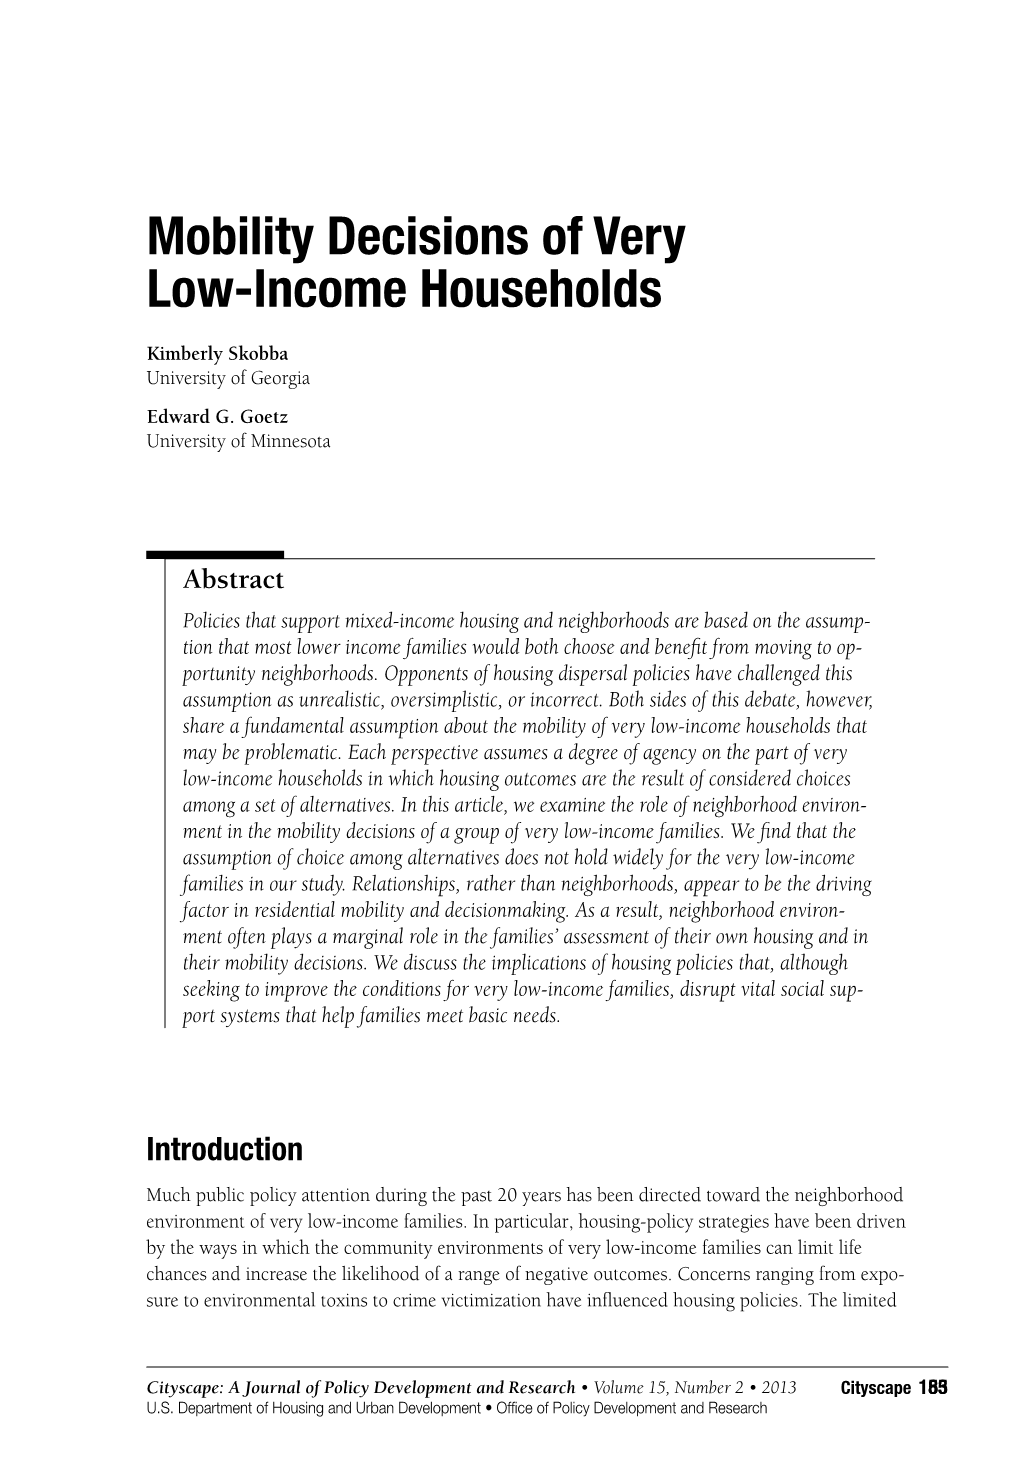 Mobility Decisions of Very Low-Income Households